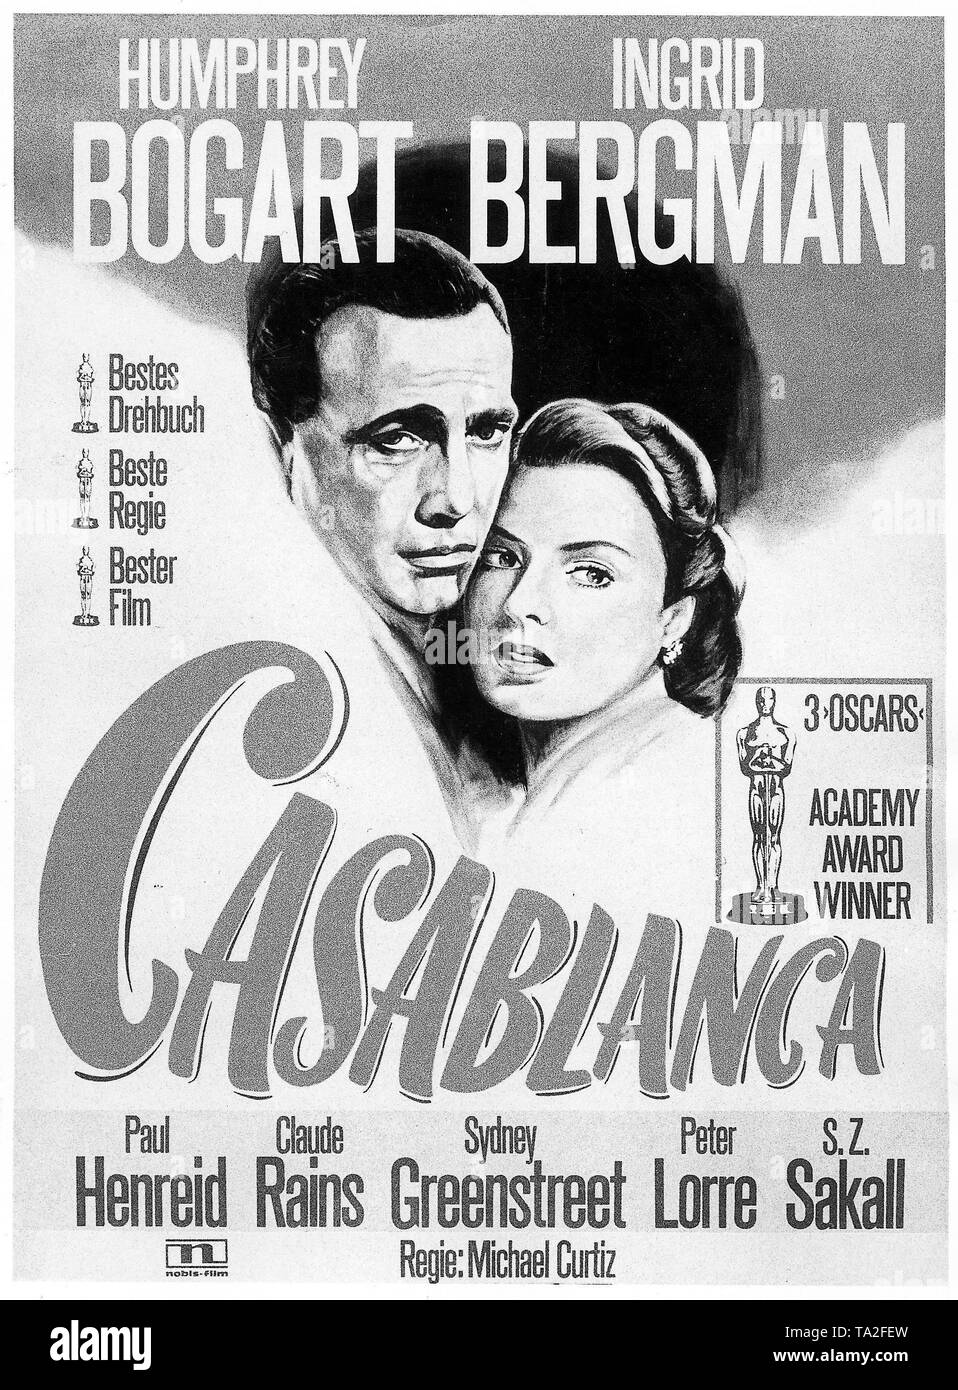 In the film of Michael Curtiz (USA 1943) the leading roles were played by Humphrey Bogart as Rick Blaine and Ingrid Bergman as Ilsa Lund. Stock Photo